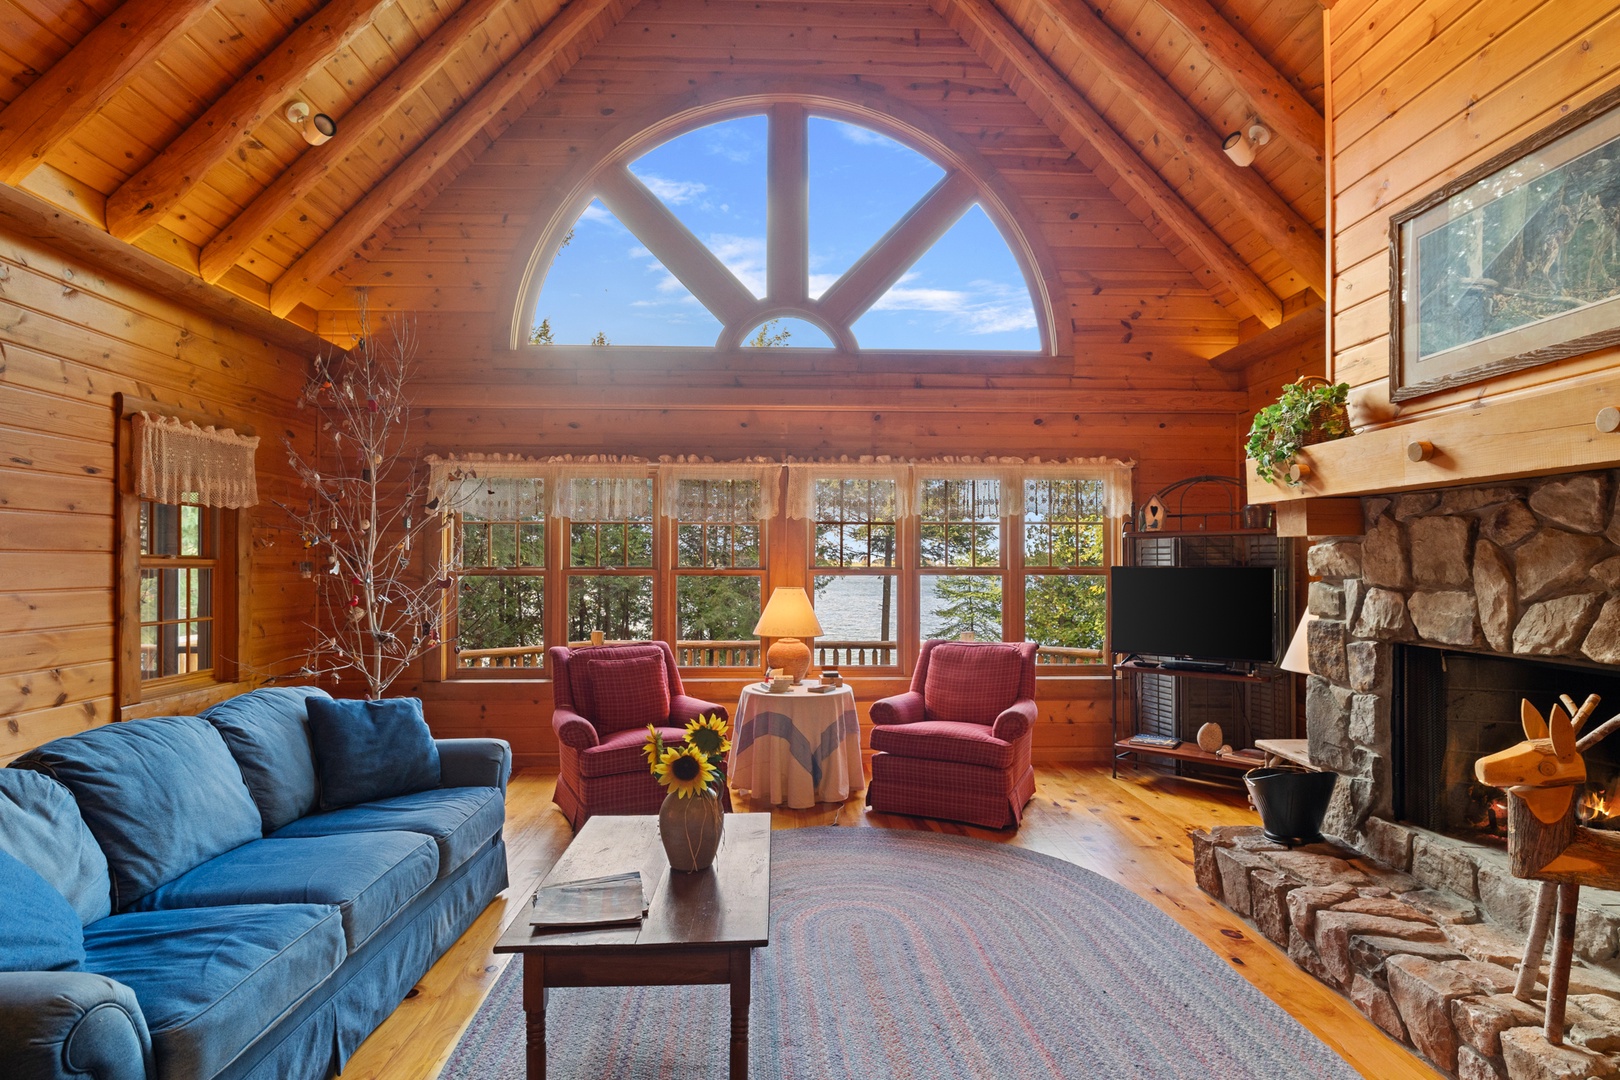 Cozy Cabin-real log cabin stay experience. Loft bed, woodsy decor, near to  town - West Union